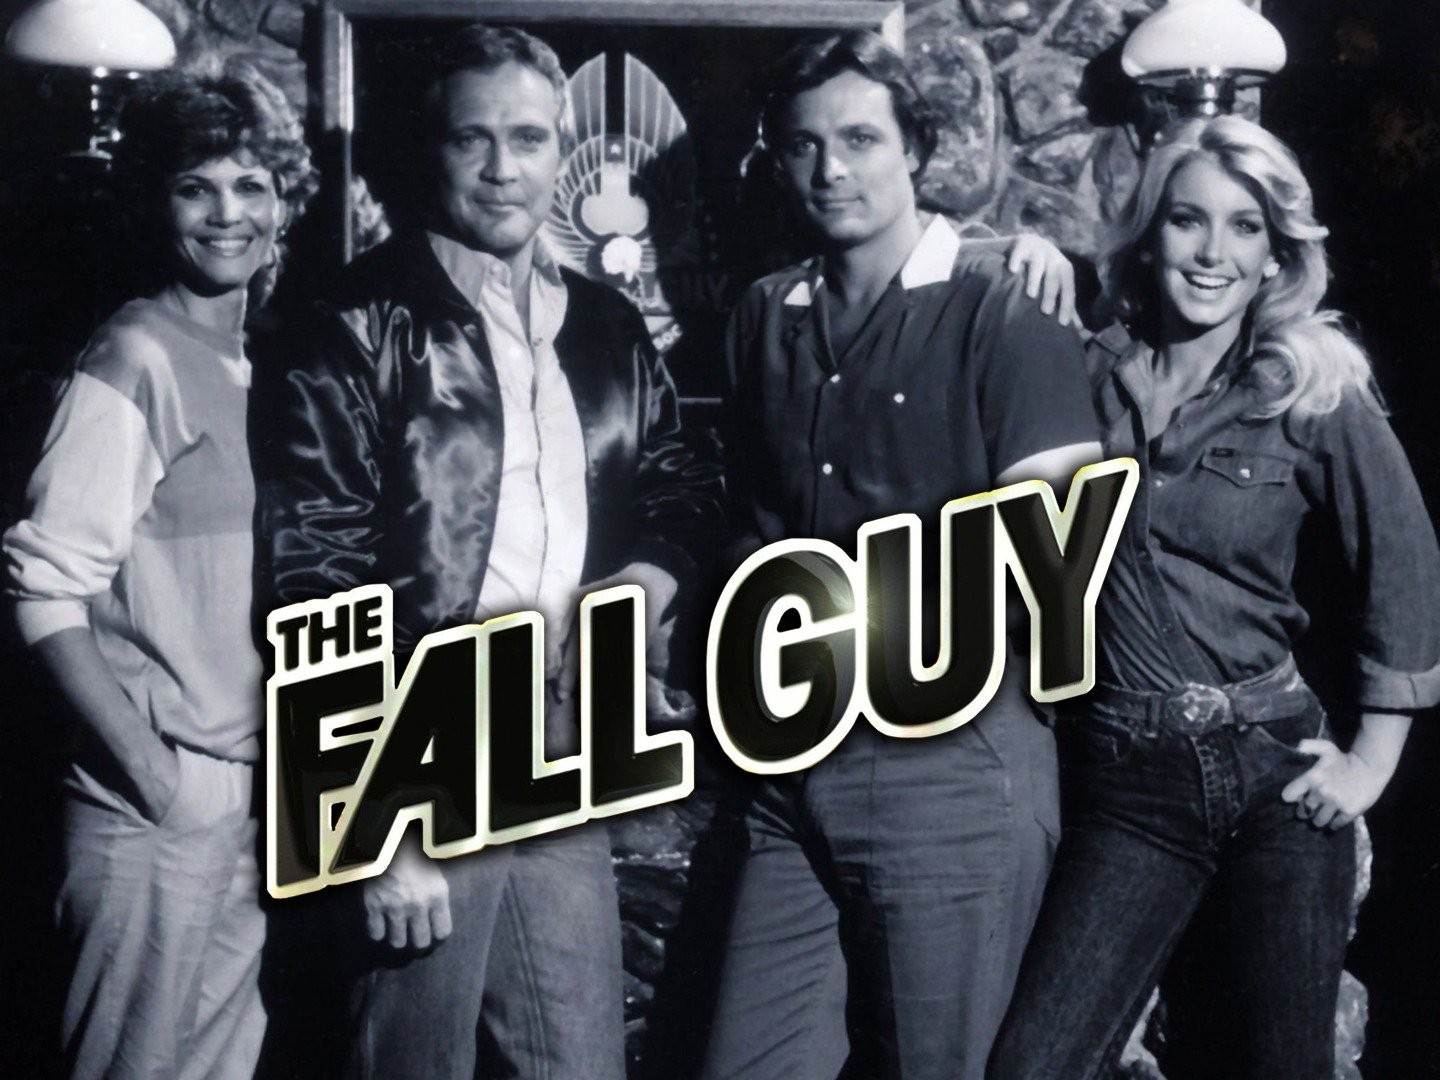 The Fall Guy movie: The Fall Guy trailer, release date, cast